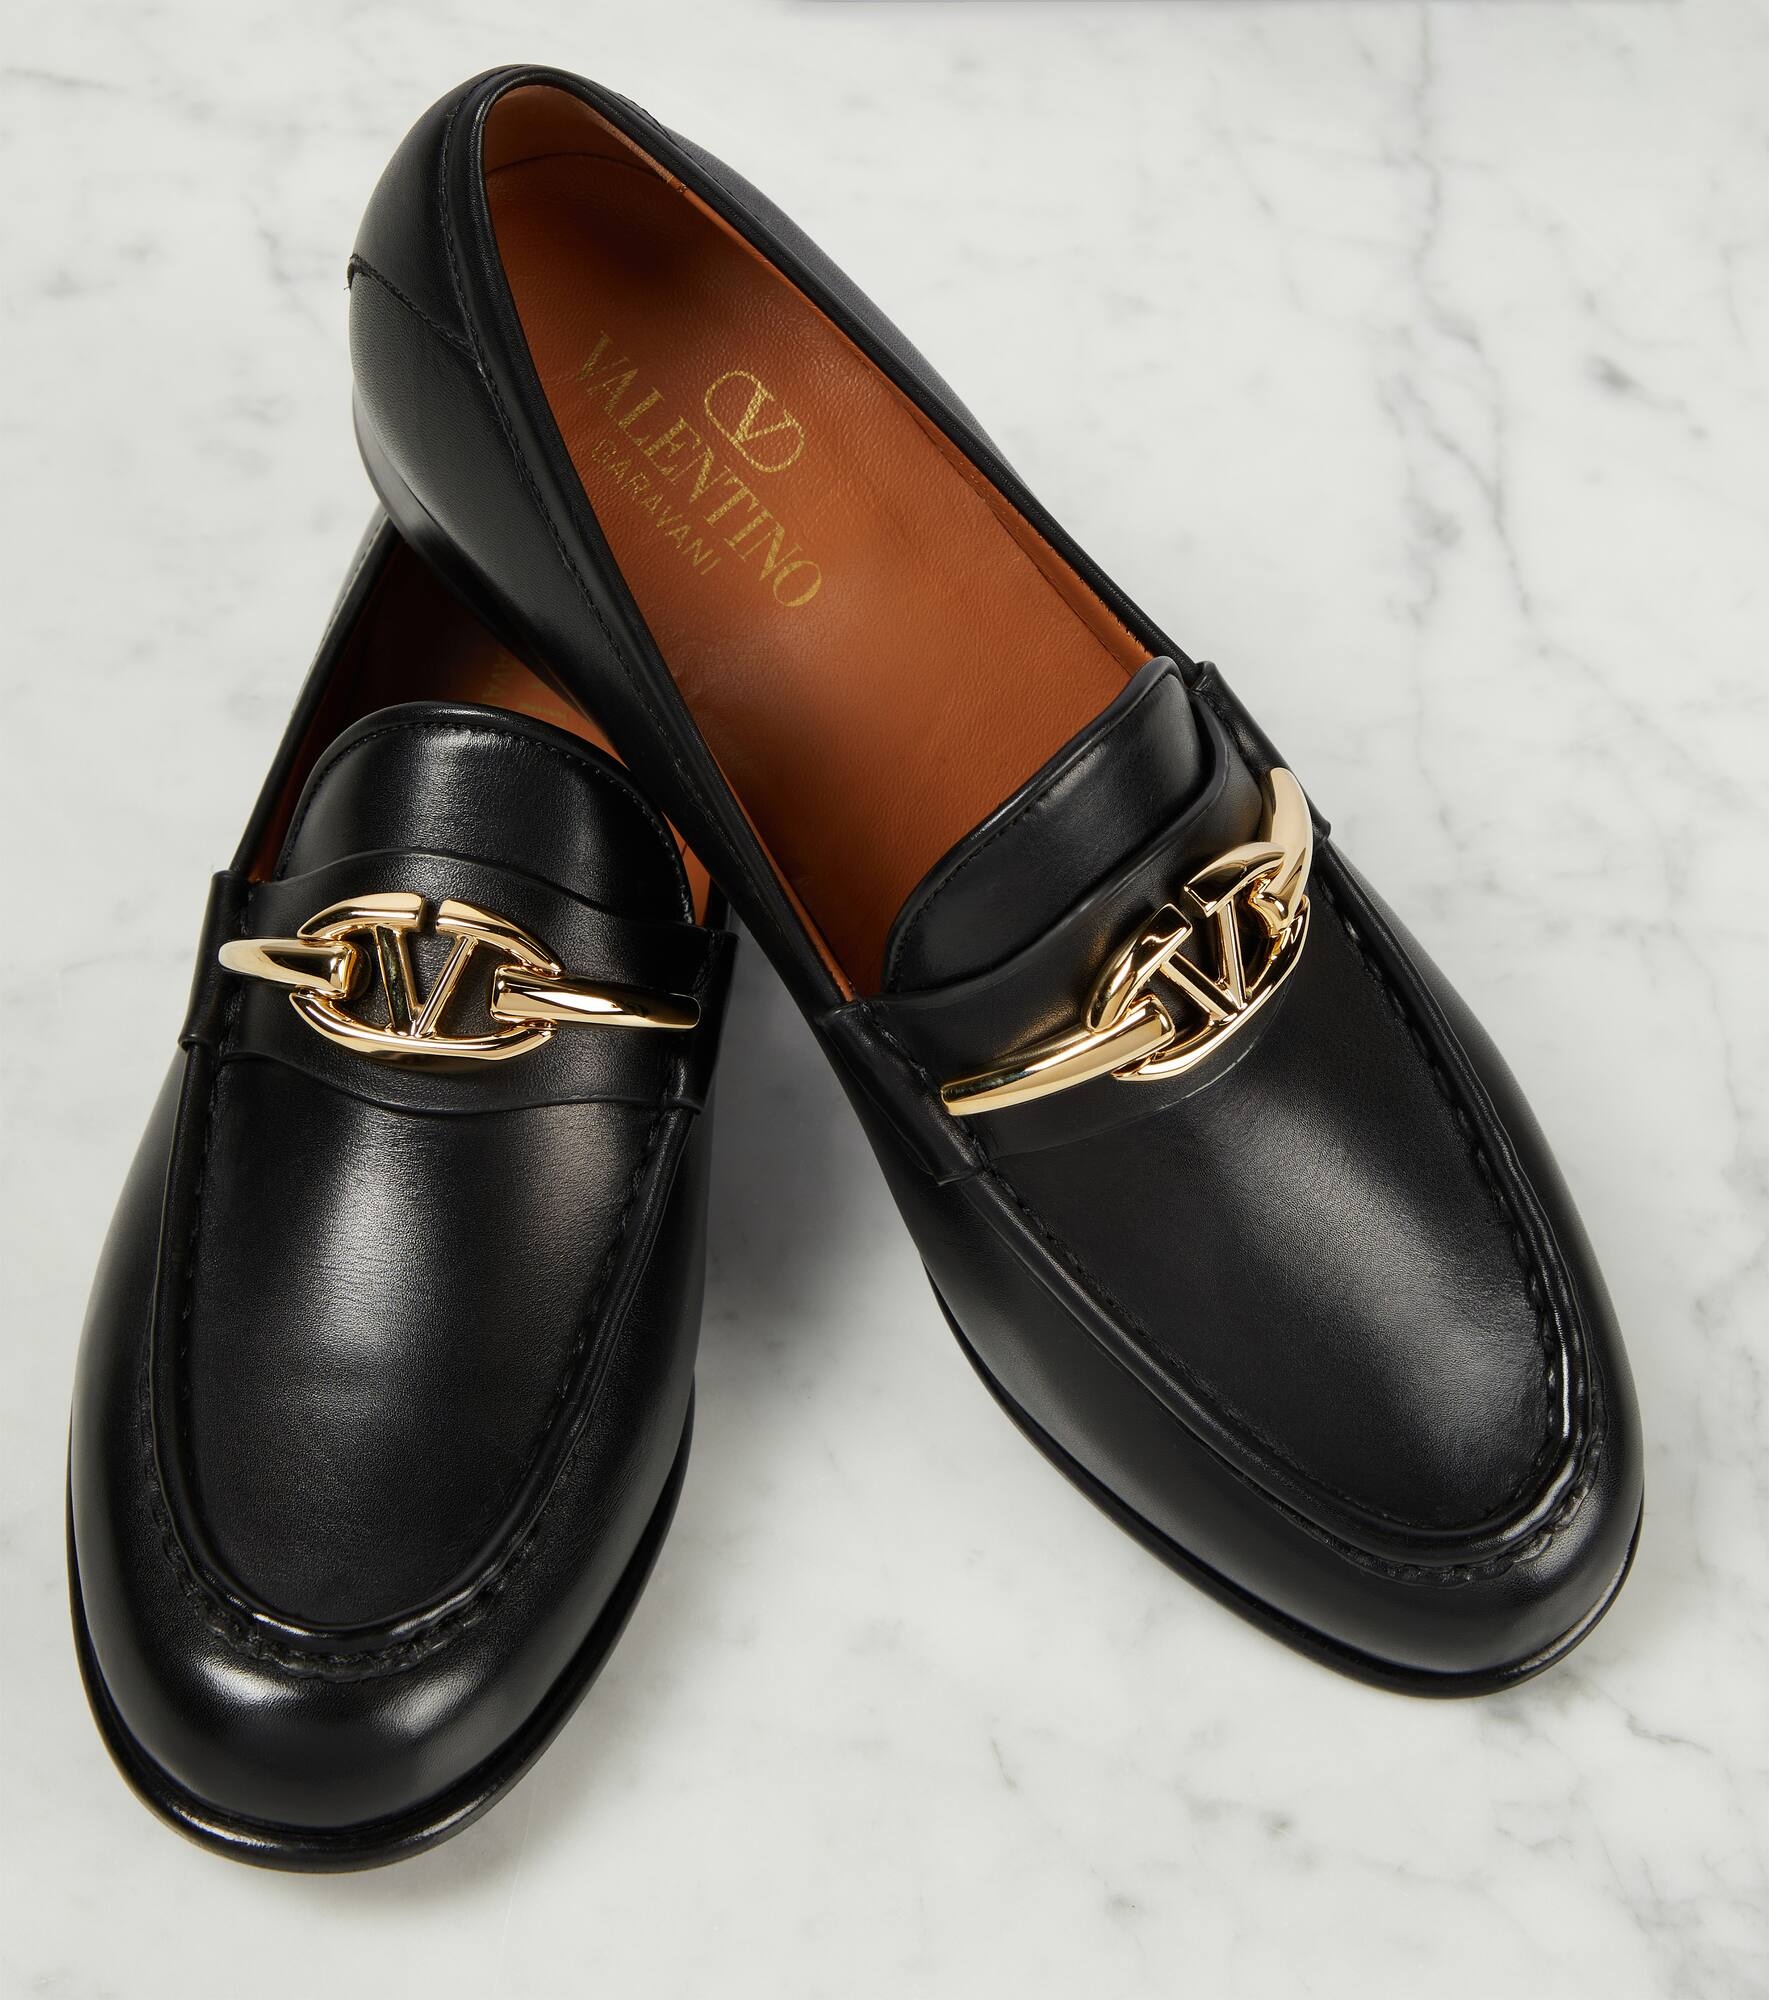 VLogo Signature leather loafers - 6